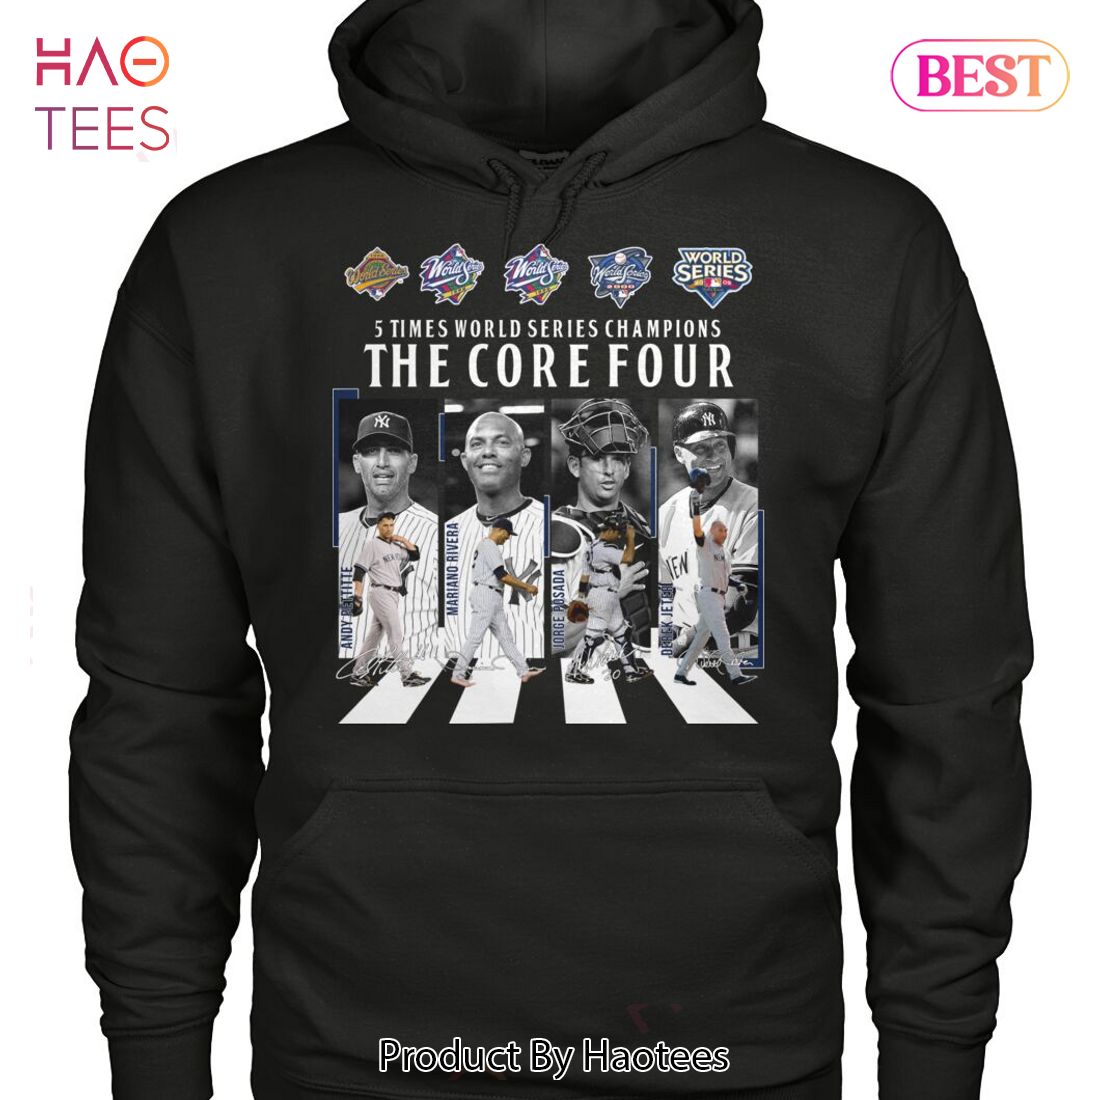 HOT 5 Times World Series Champions The Core Four New York Yankees